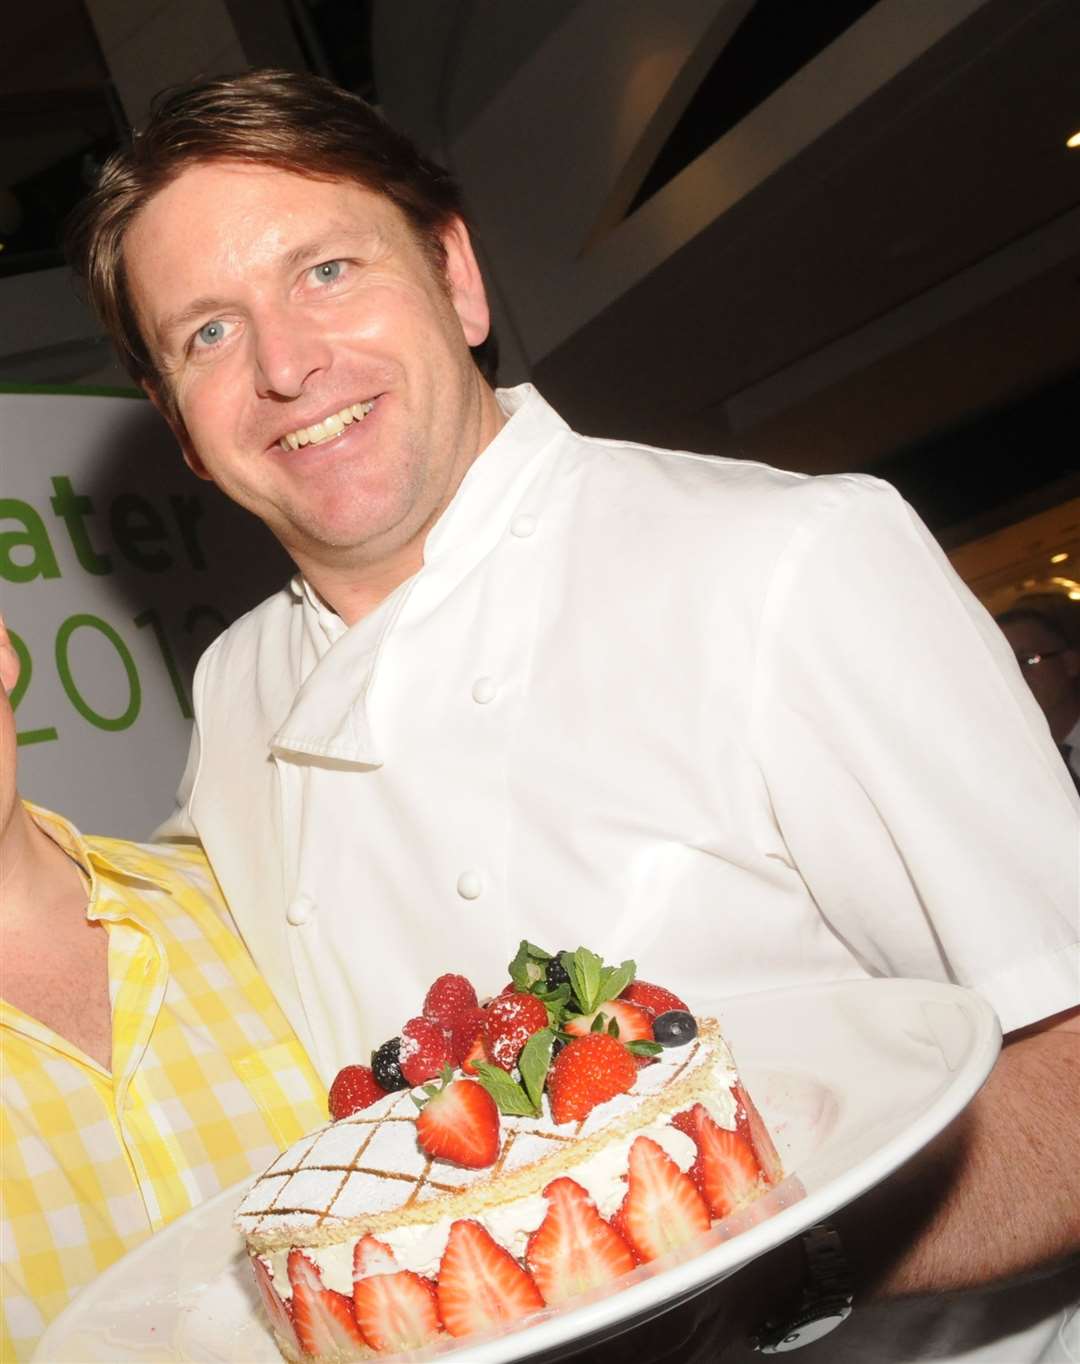 James Martin was at the launch of BBC's Good Food Spring Show at Bluewater